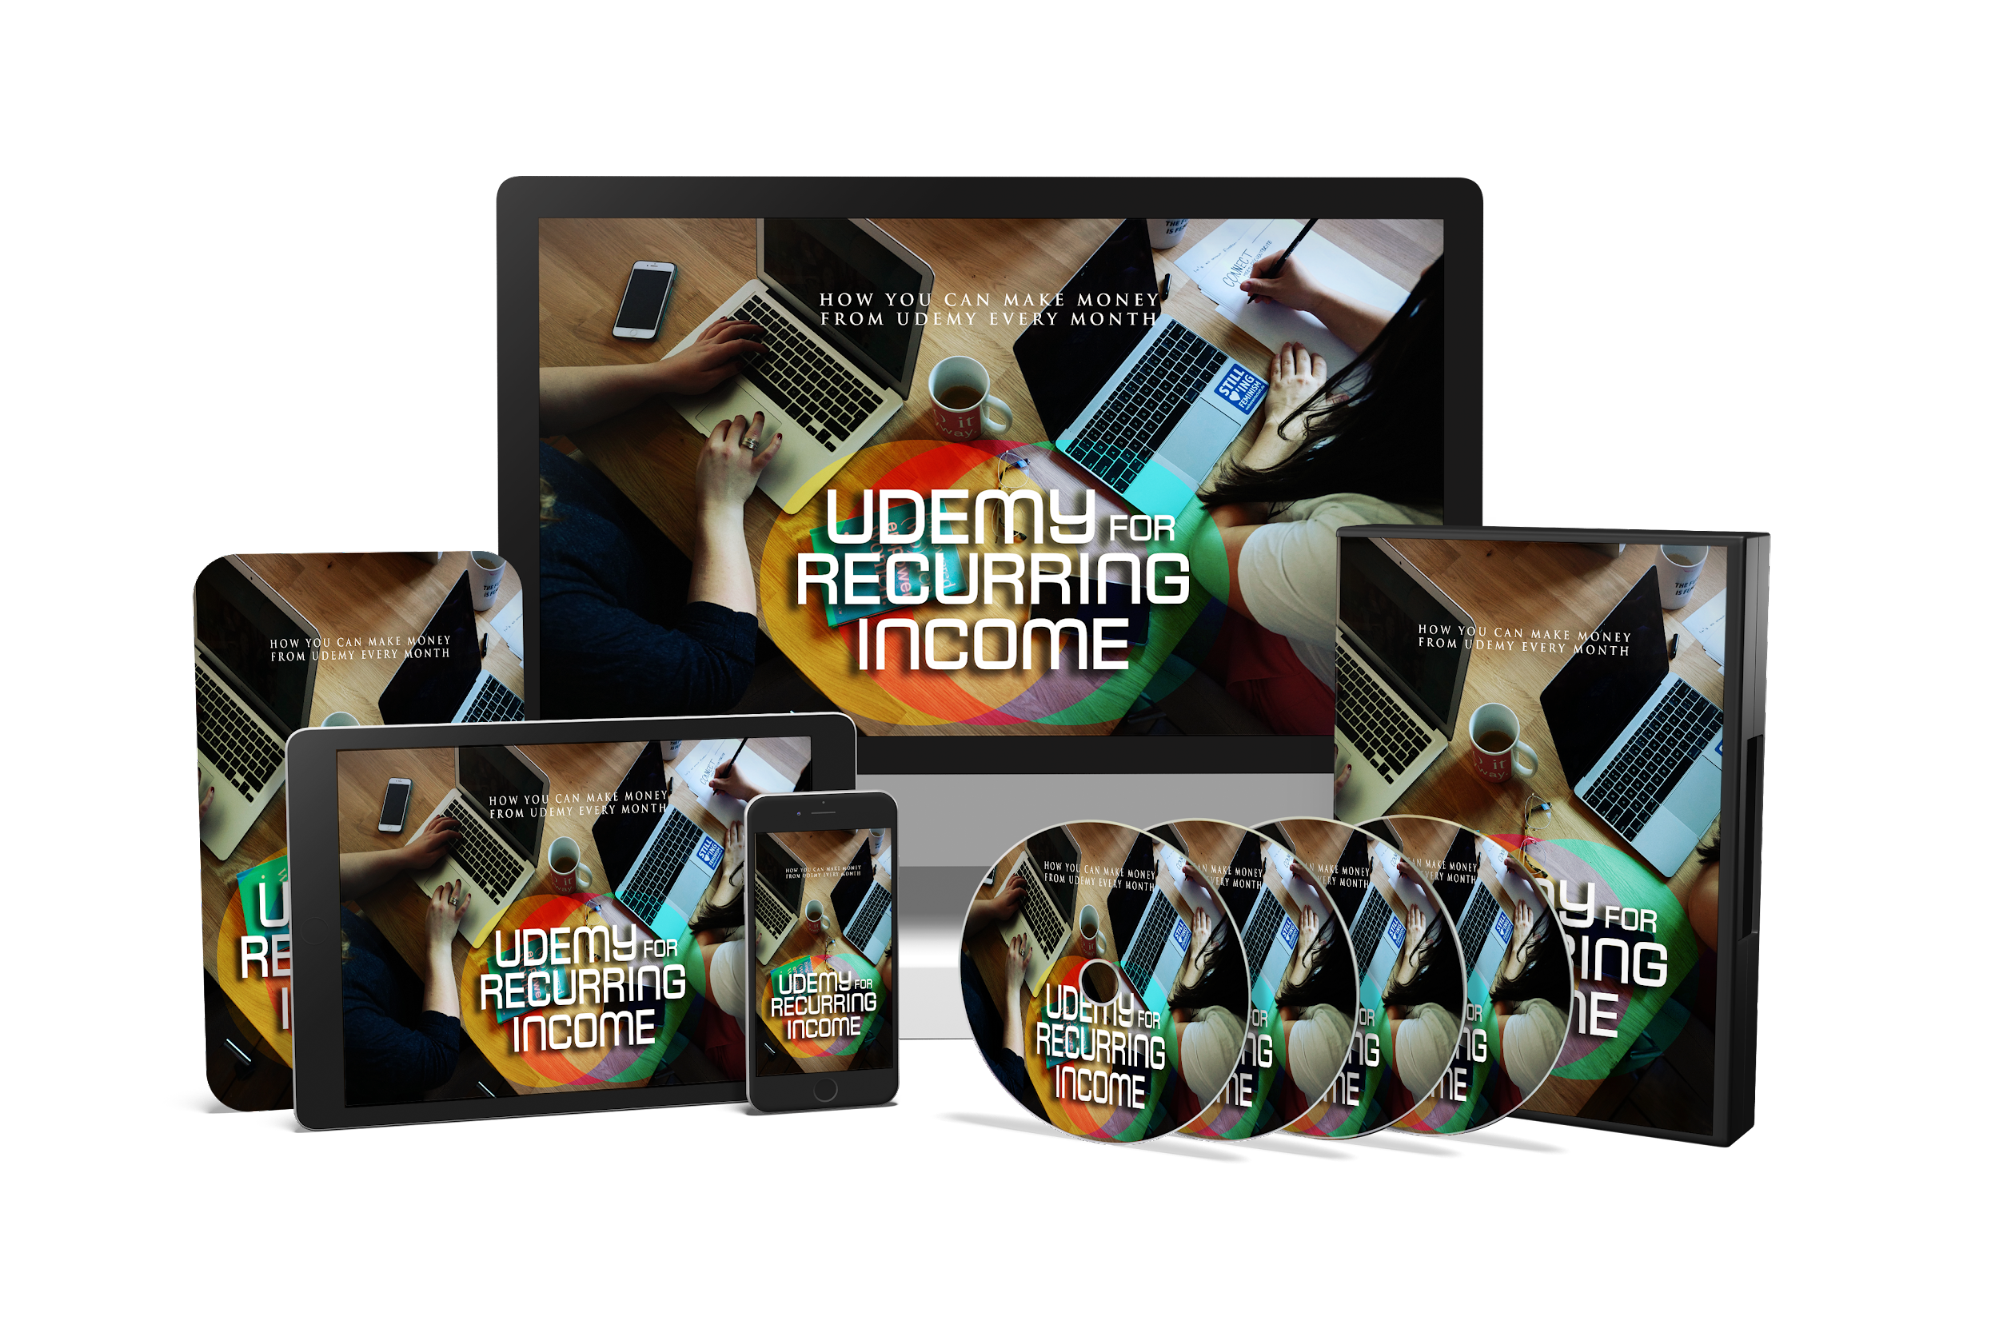 Udemy For Recurring Income Video Course